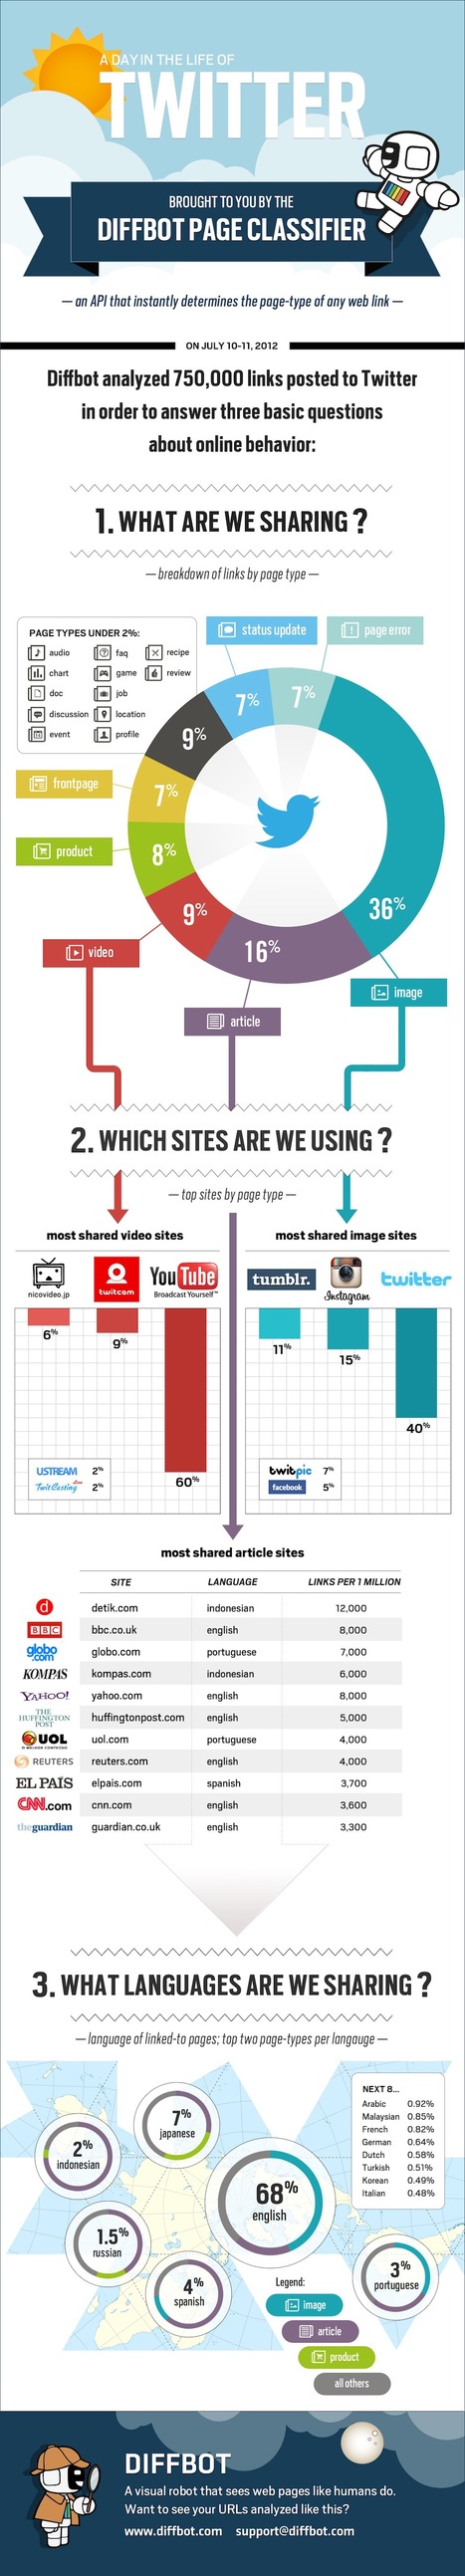 WOW Twitter's Visual Share Surprise Of The Day [INFOGRAPHIC] | BI Revolution | Scoop.it